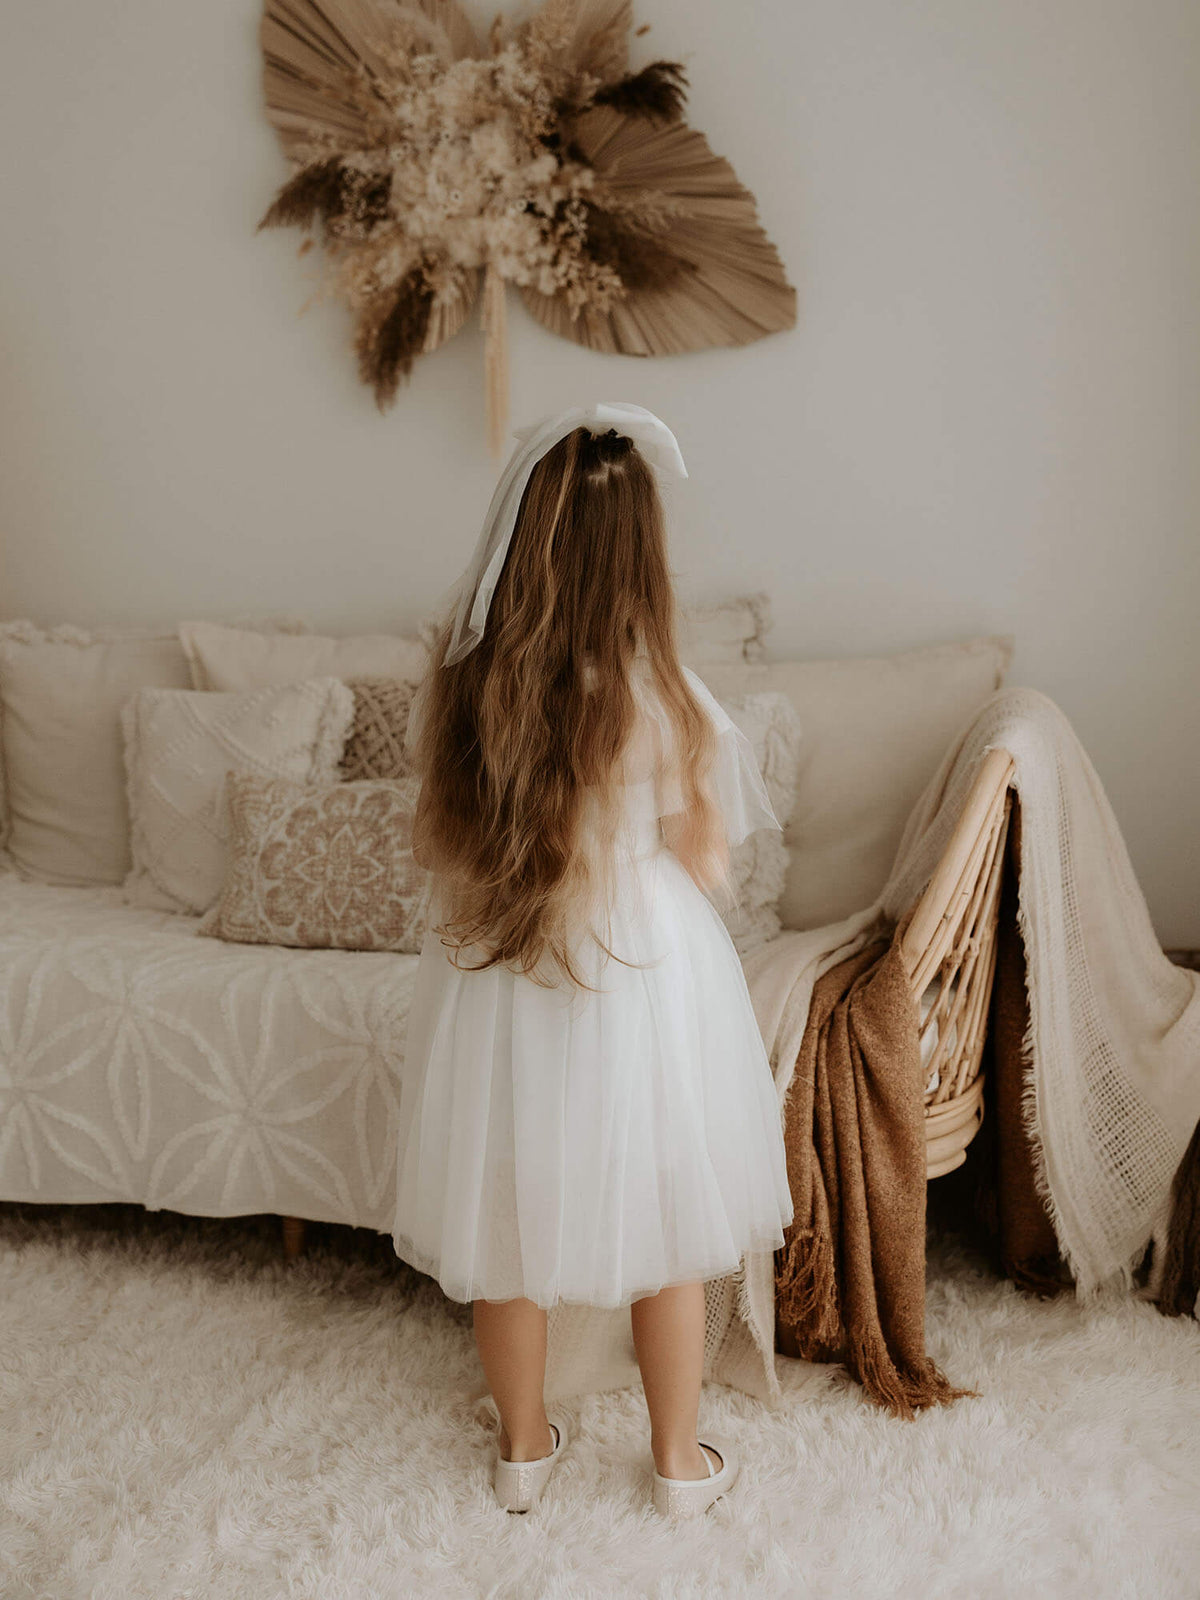 Our Isla flower girl dress in ivory shown from the back.